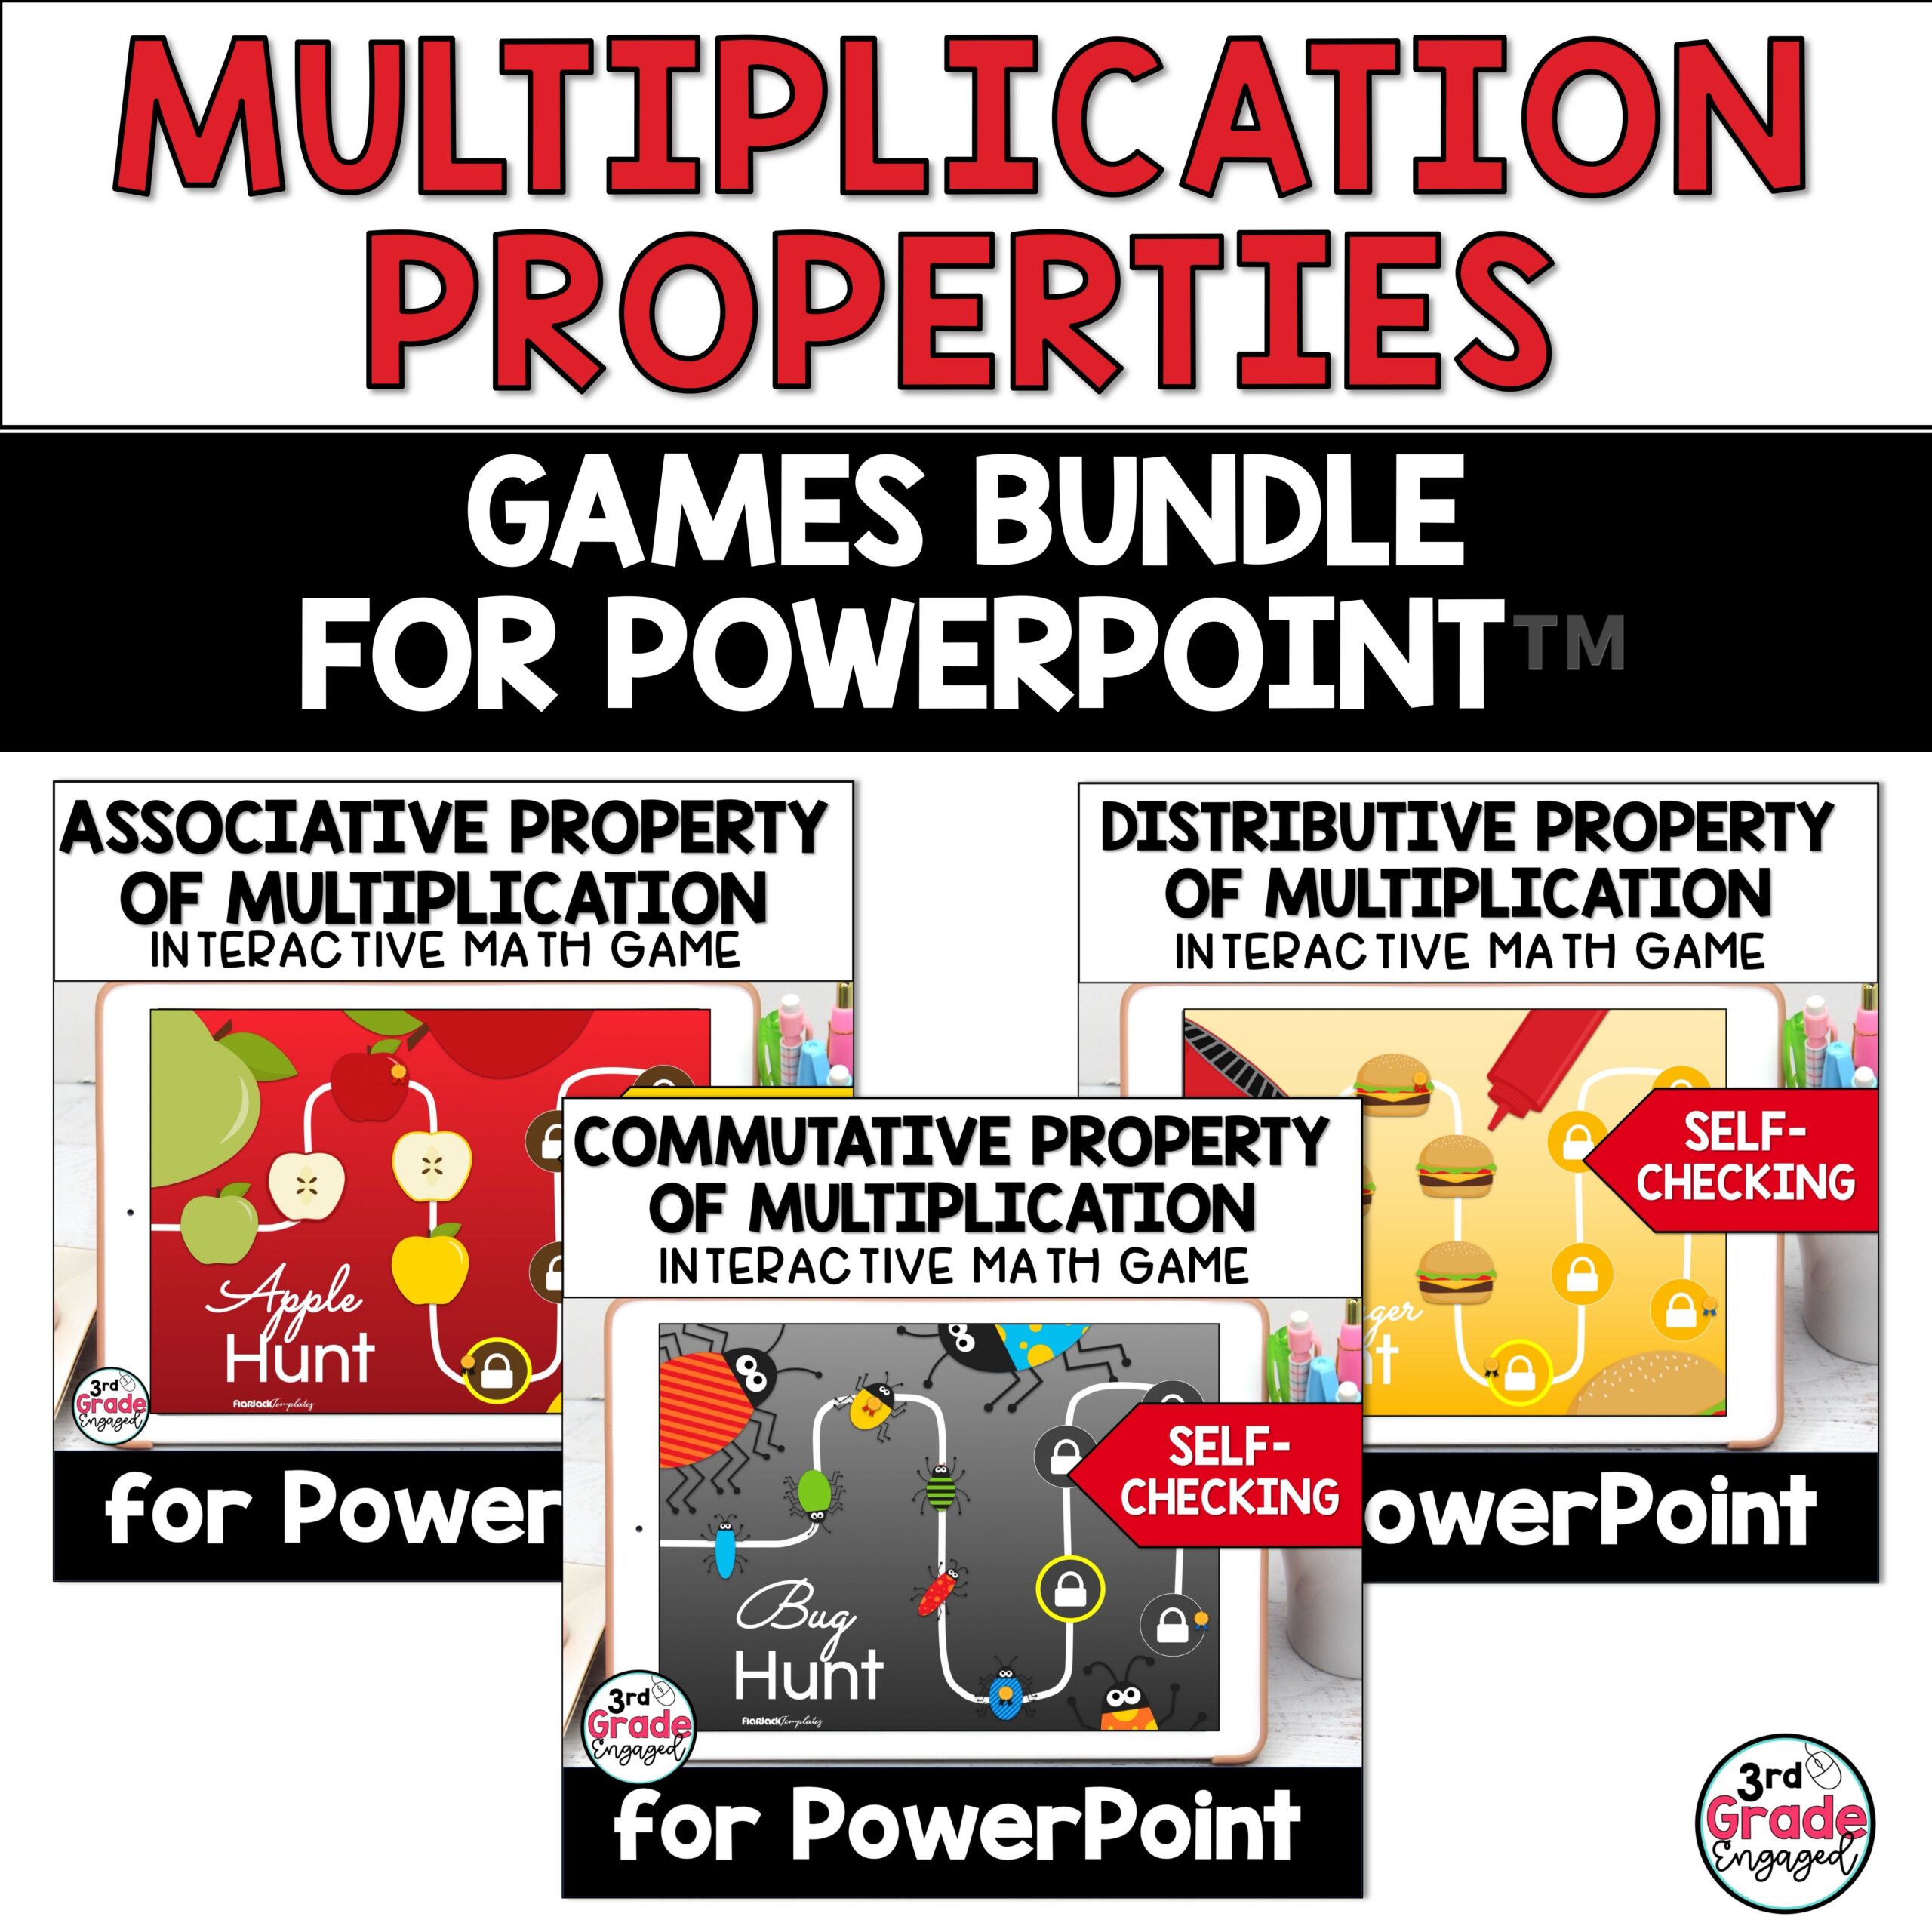 Properties of Multiplication Games Bundle for PowerPoint ™'s featured image